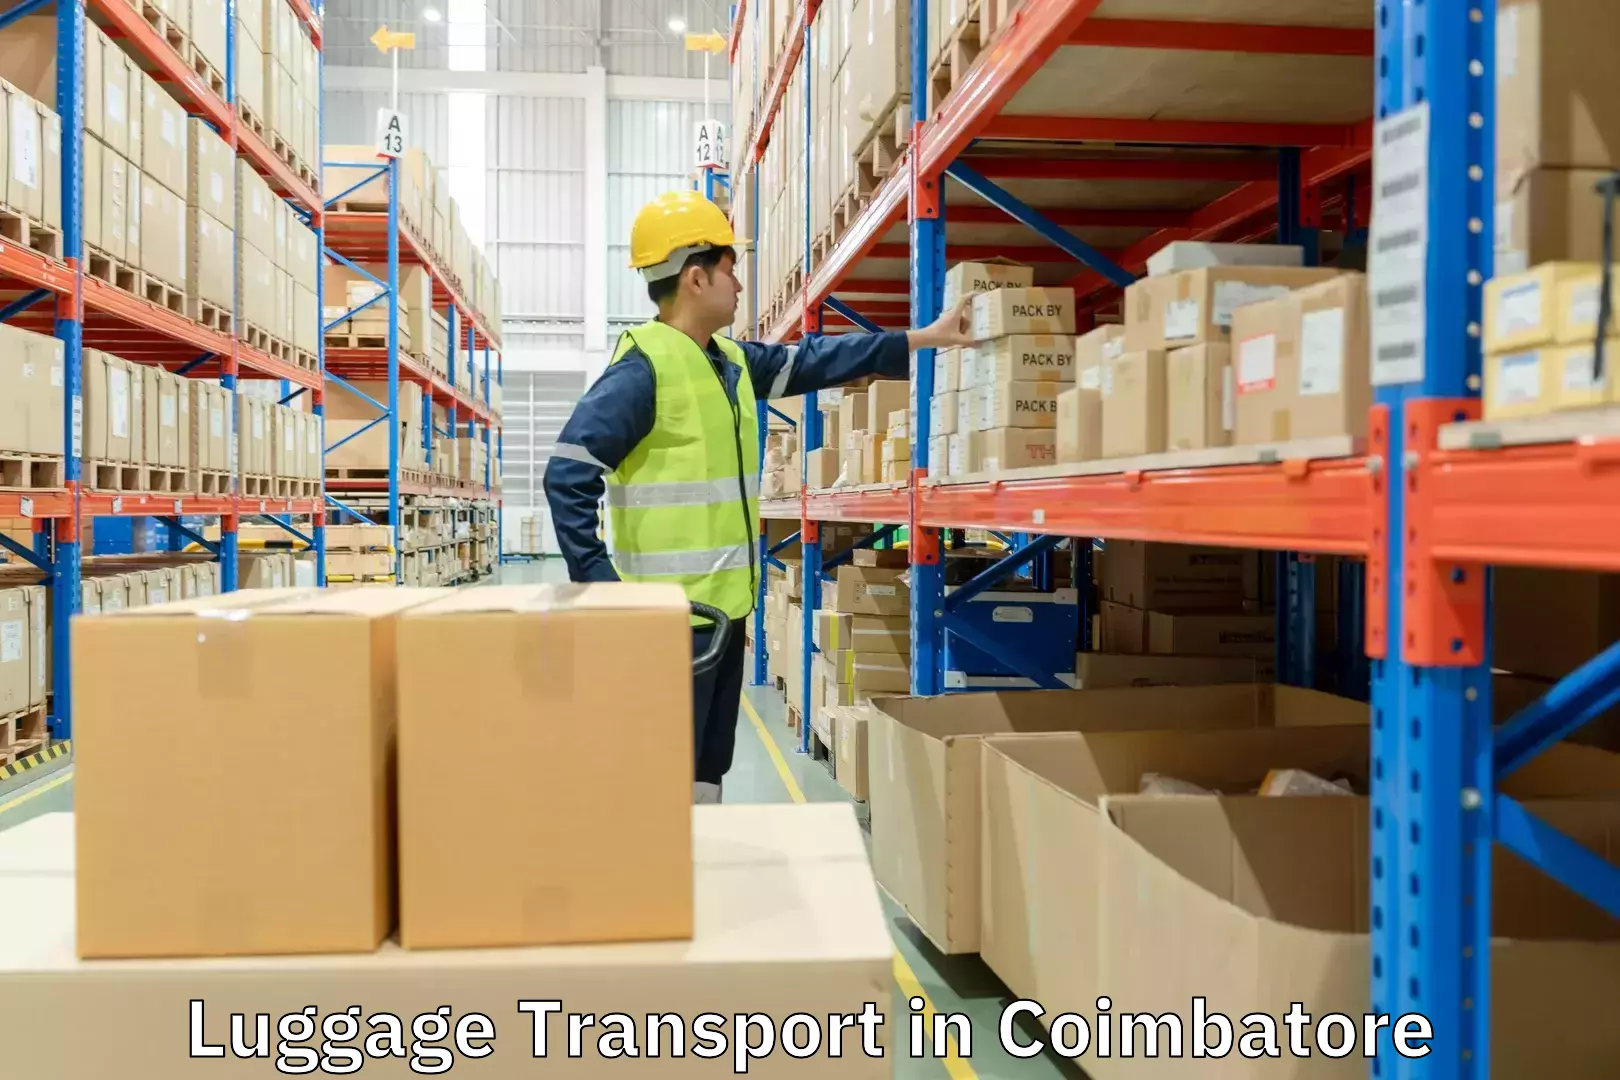 Baggage transport coordination in Coimbatore